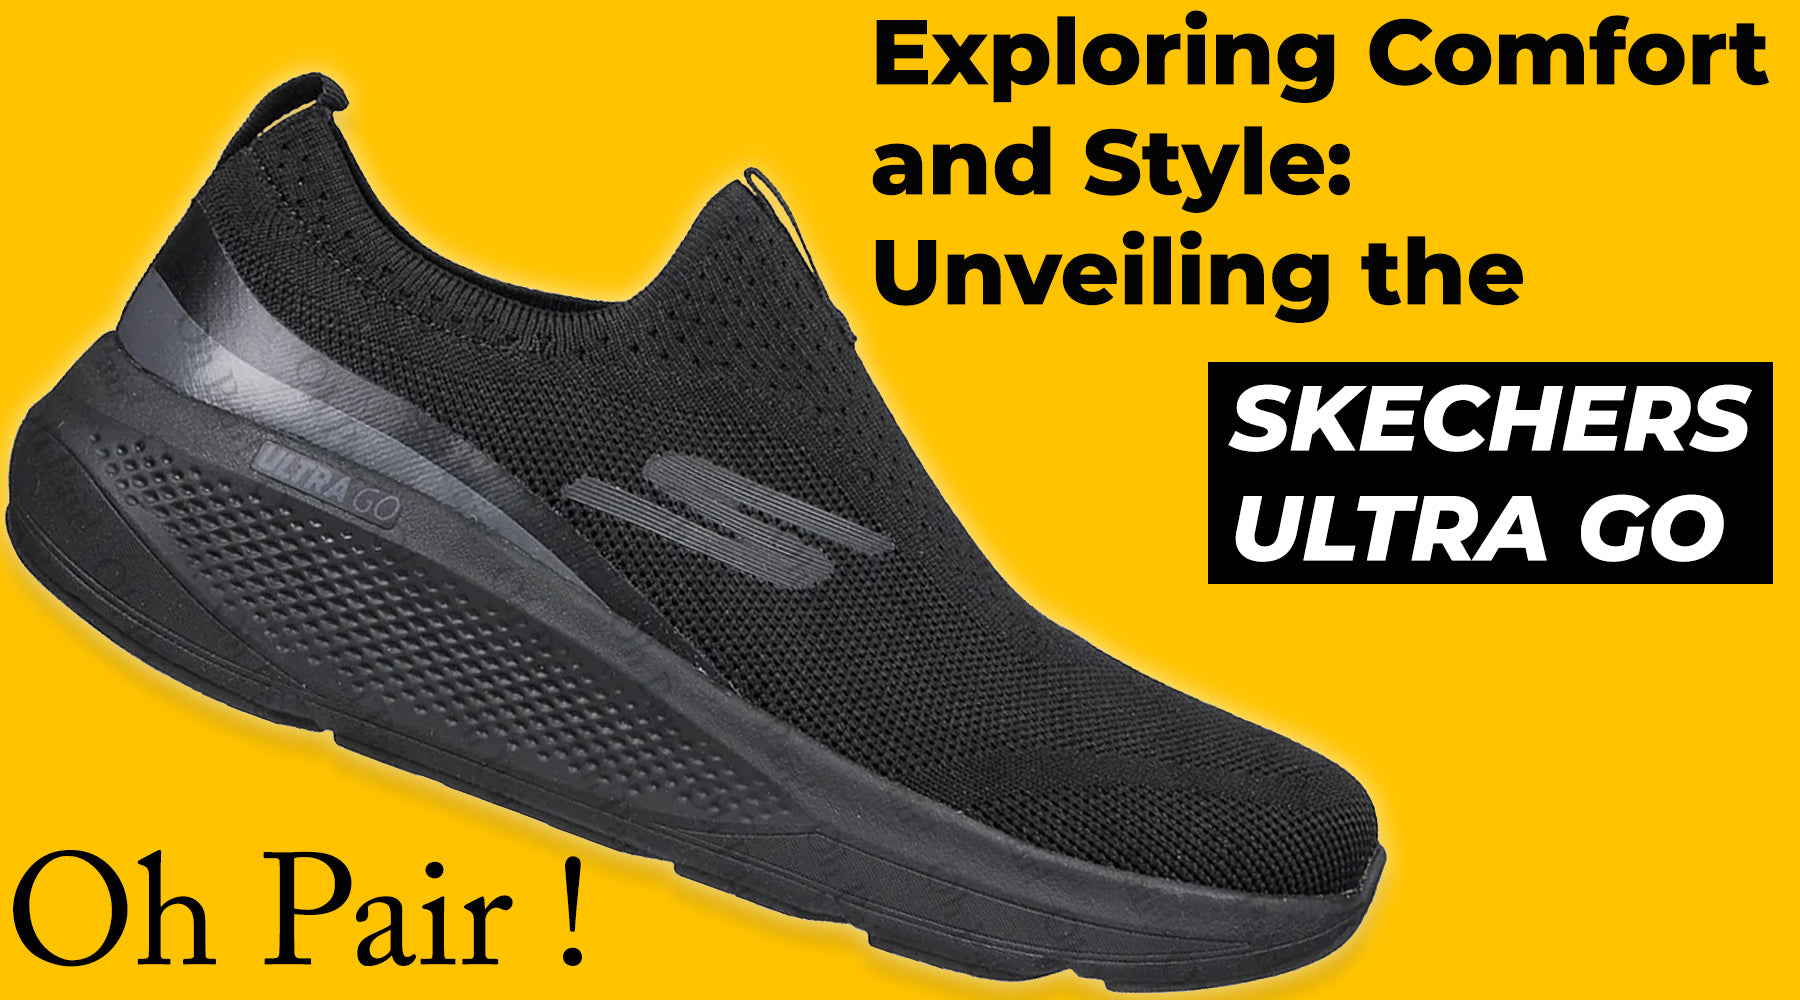 Exploring Comfort and Style: Unveiling the Skechers Ultra Go Price in Pakistan and the Craze for Skechers Shoes